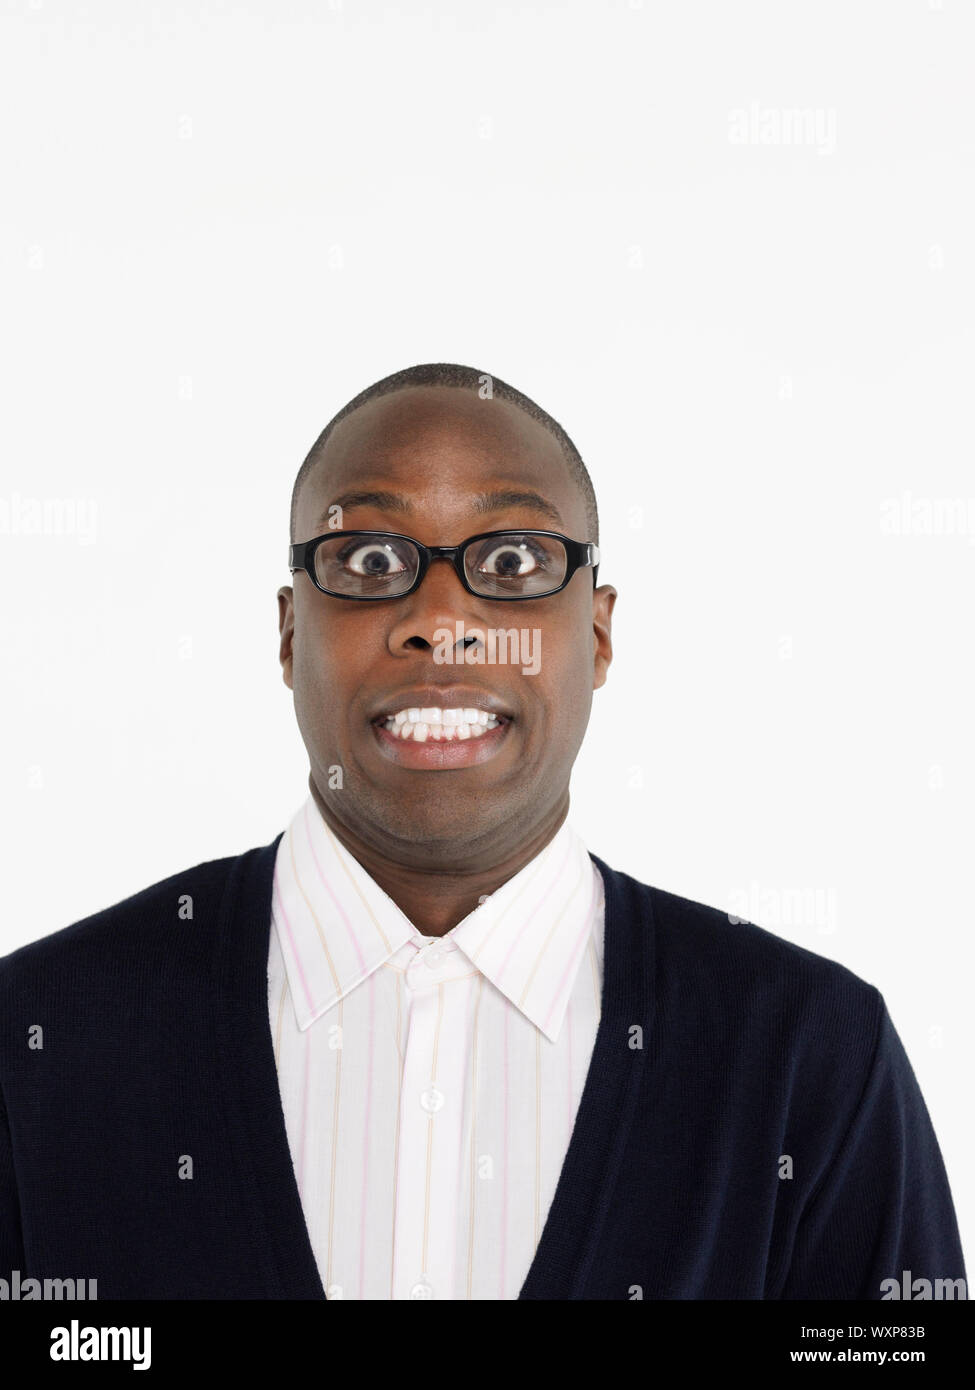 Closeup portrait of an African American man with eyes wide open against white background Stock Photo